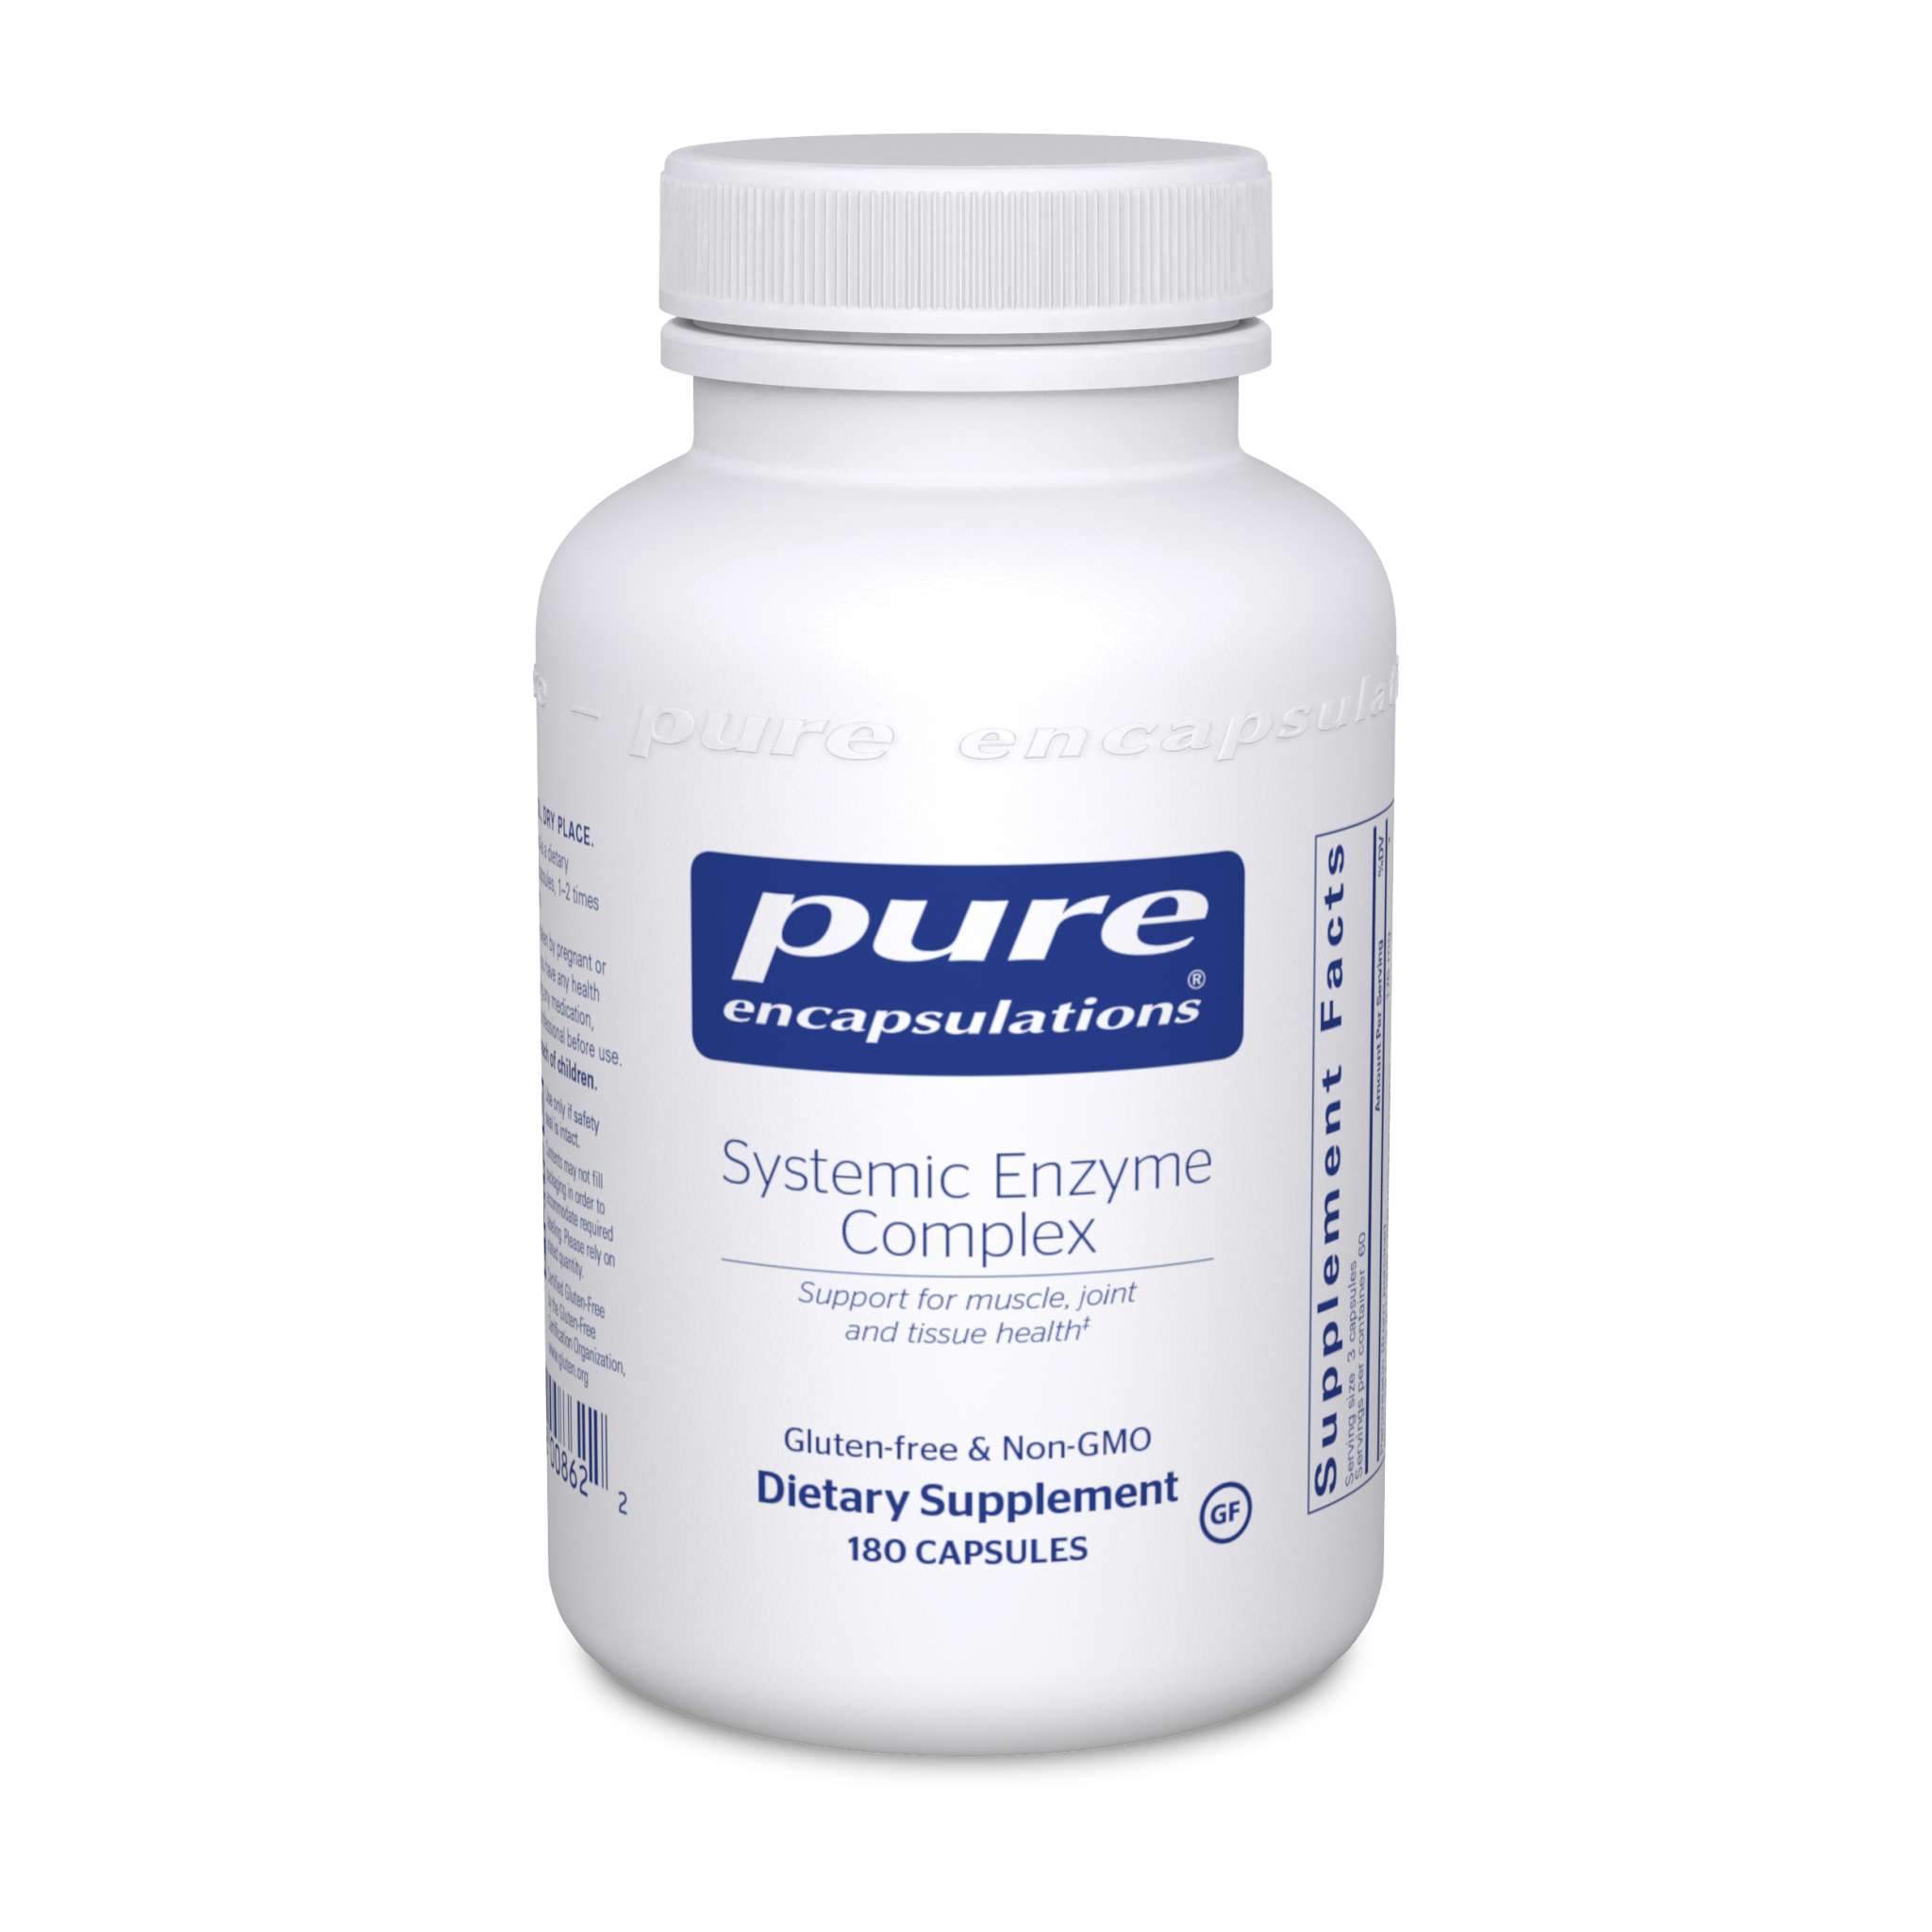 Pure Encapsulations - Systemic Enzyme Complex